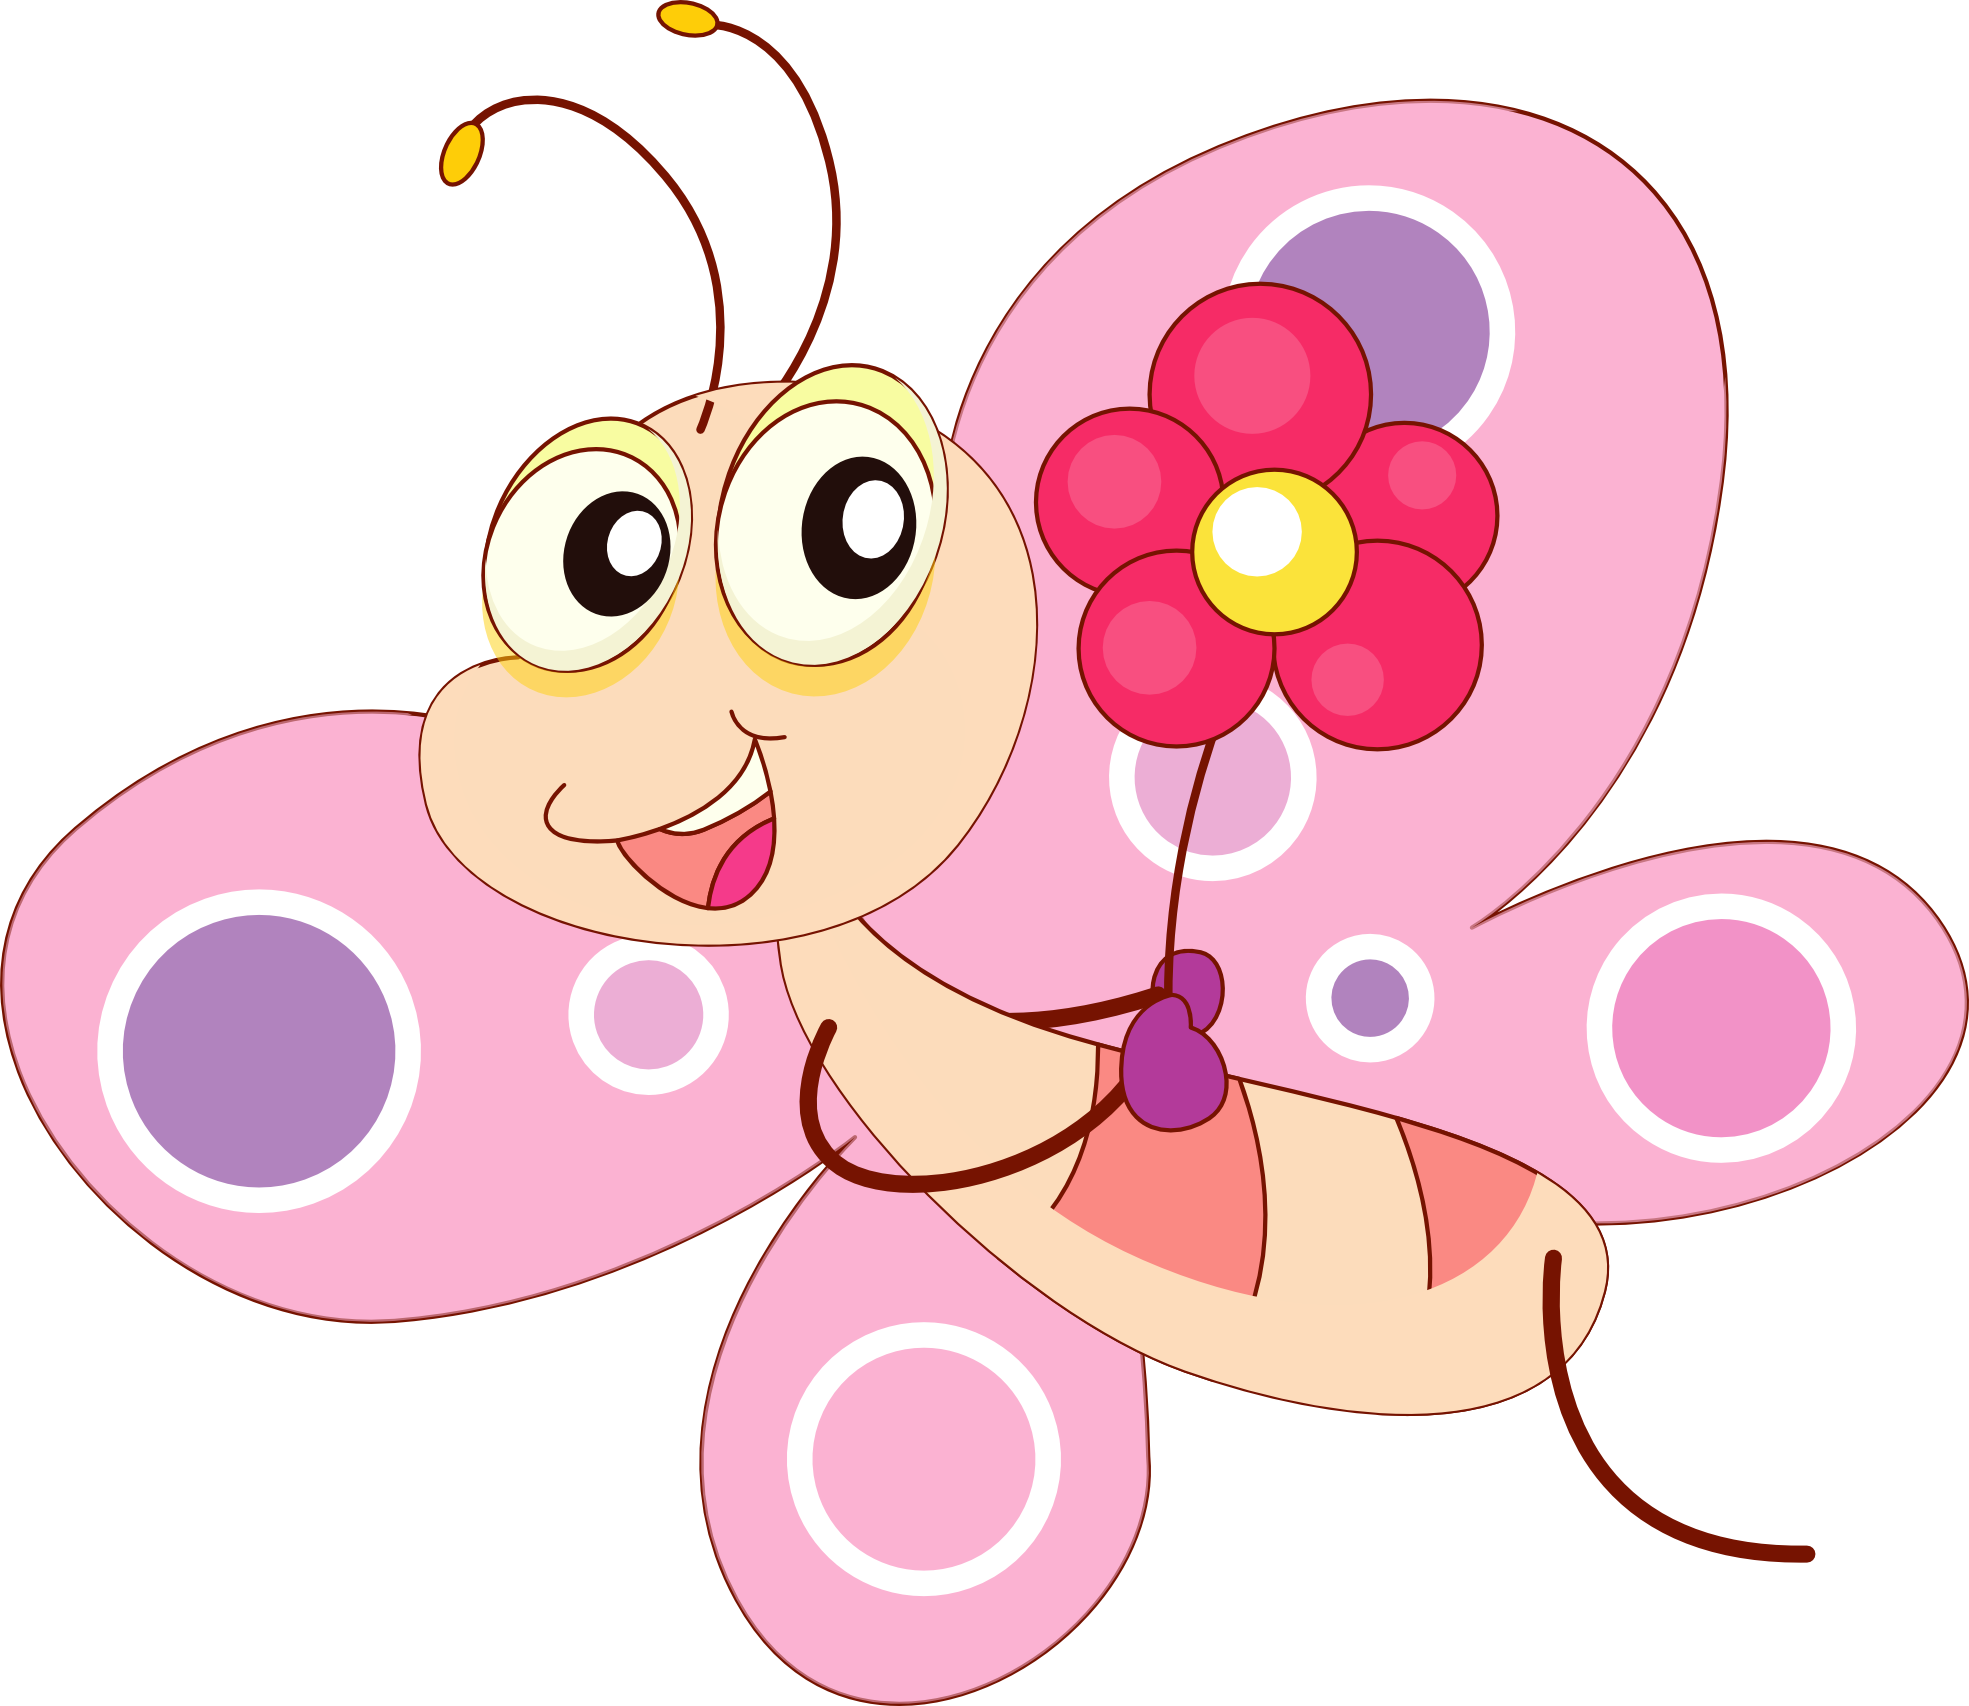 Butterfly Cartoon PNG Transparent Background, Free Download #31563 -  FreeIconsPNG